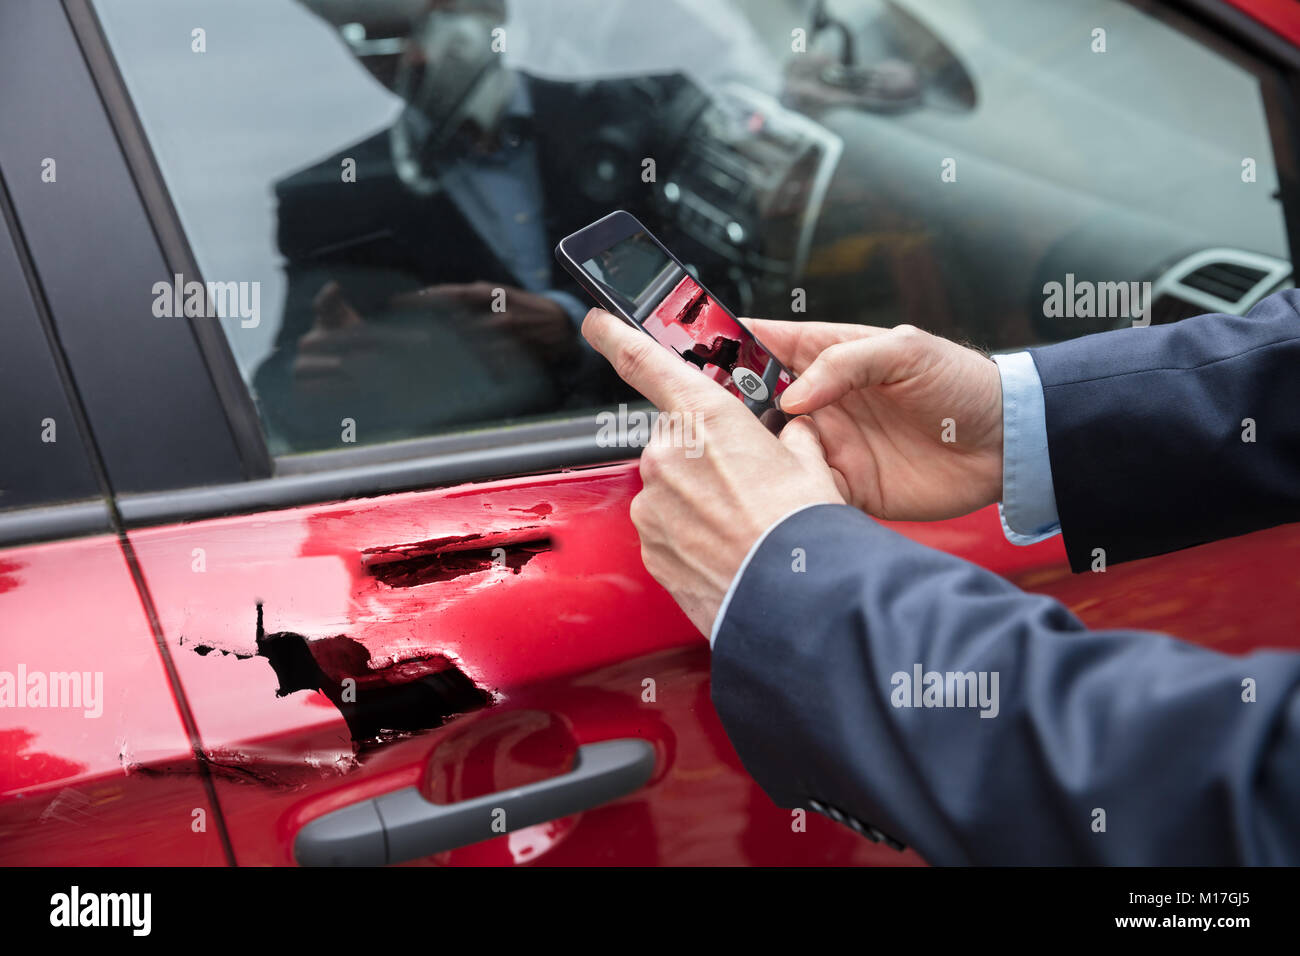 Close-up Of A Person Taking Picture Of Damaged Car On Mobile Phone Stock Photo